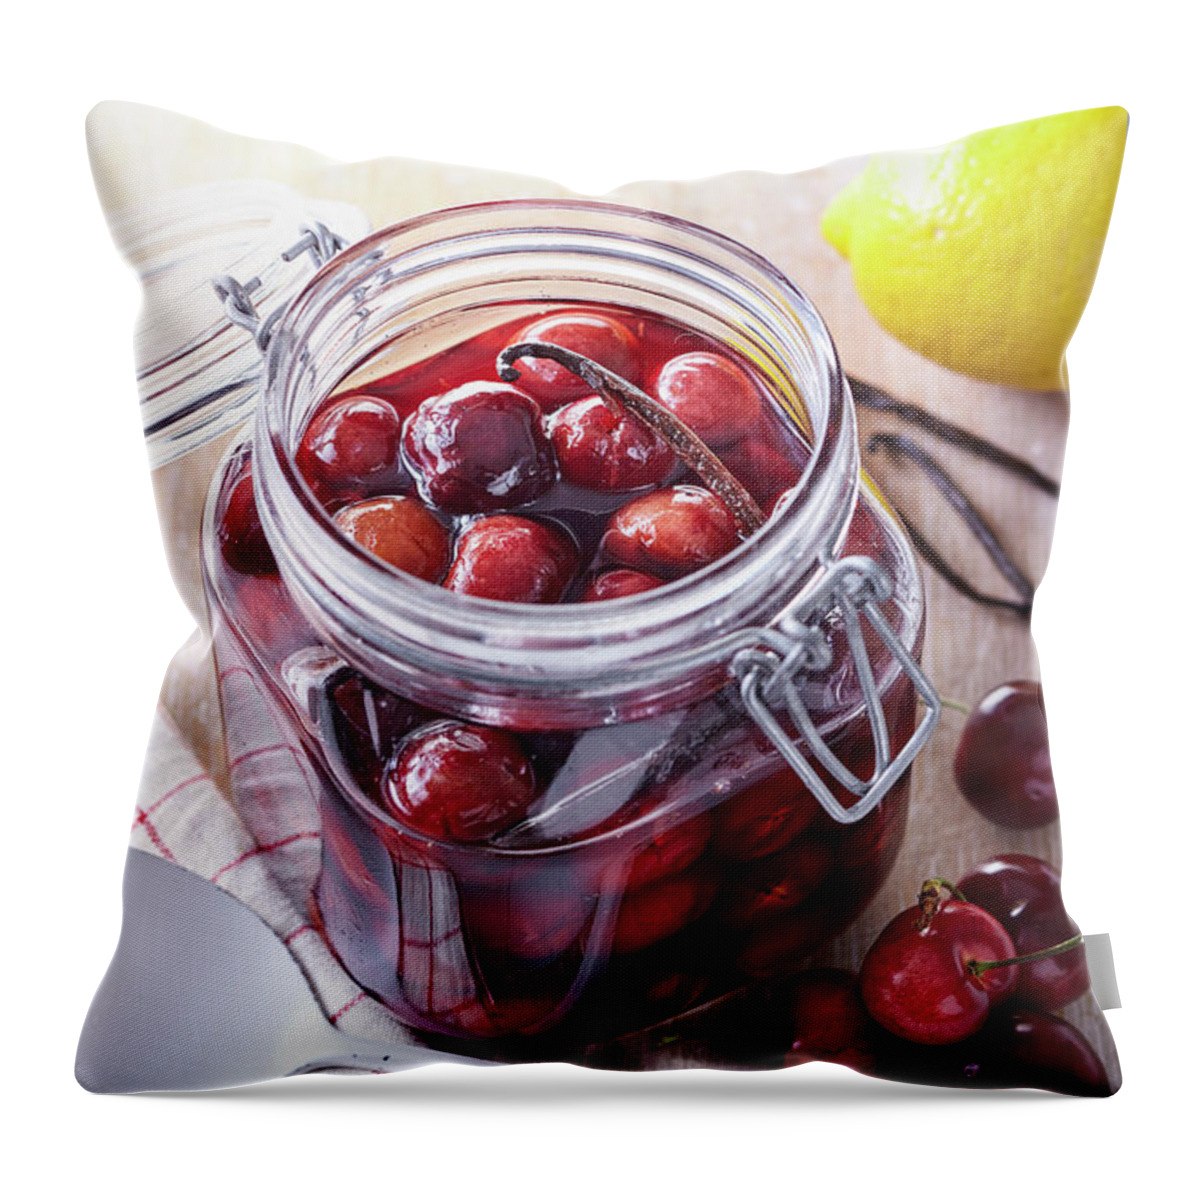 Cuisine At Home Throw Pillow featuring the photograph Maraschino Cherries by Cuisine at Home